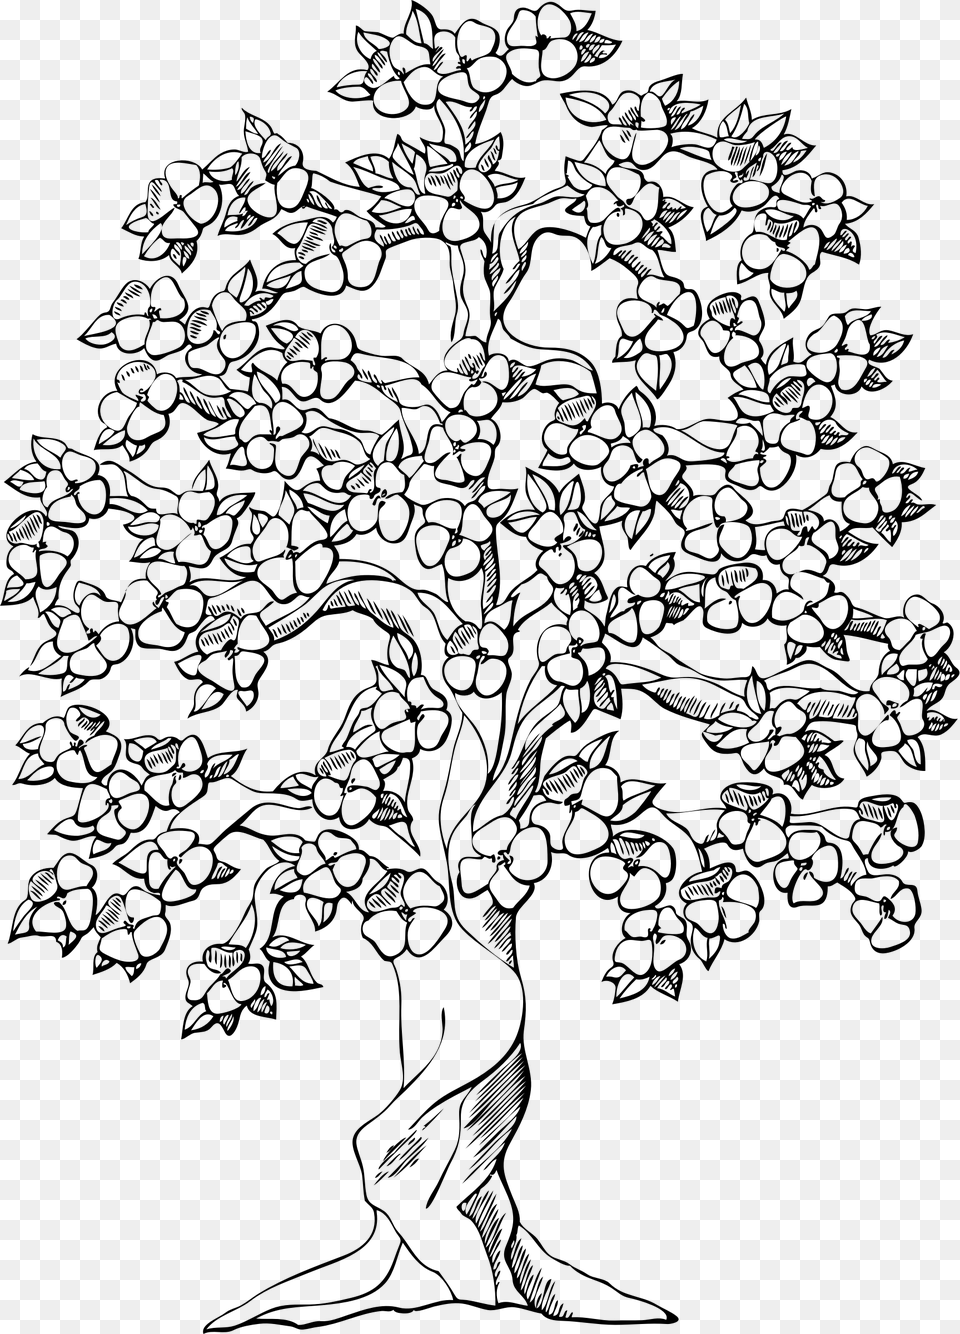 Flowering Tree Clip Arts Drawings Of Trees With Flowers, Gray Free Png